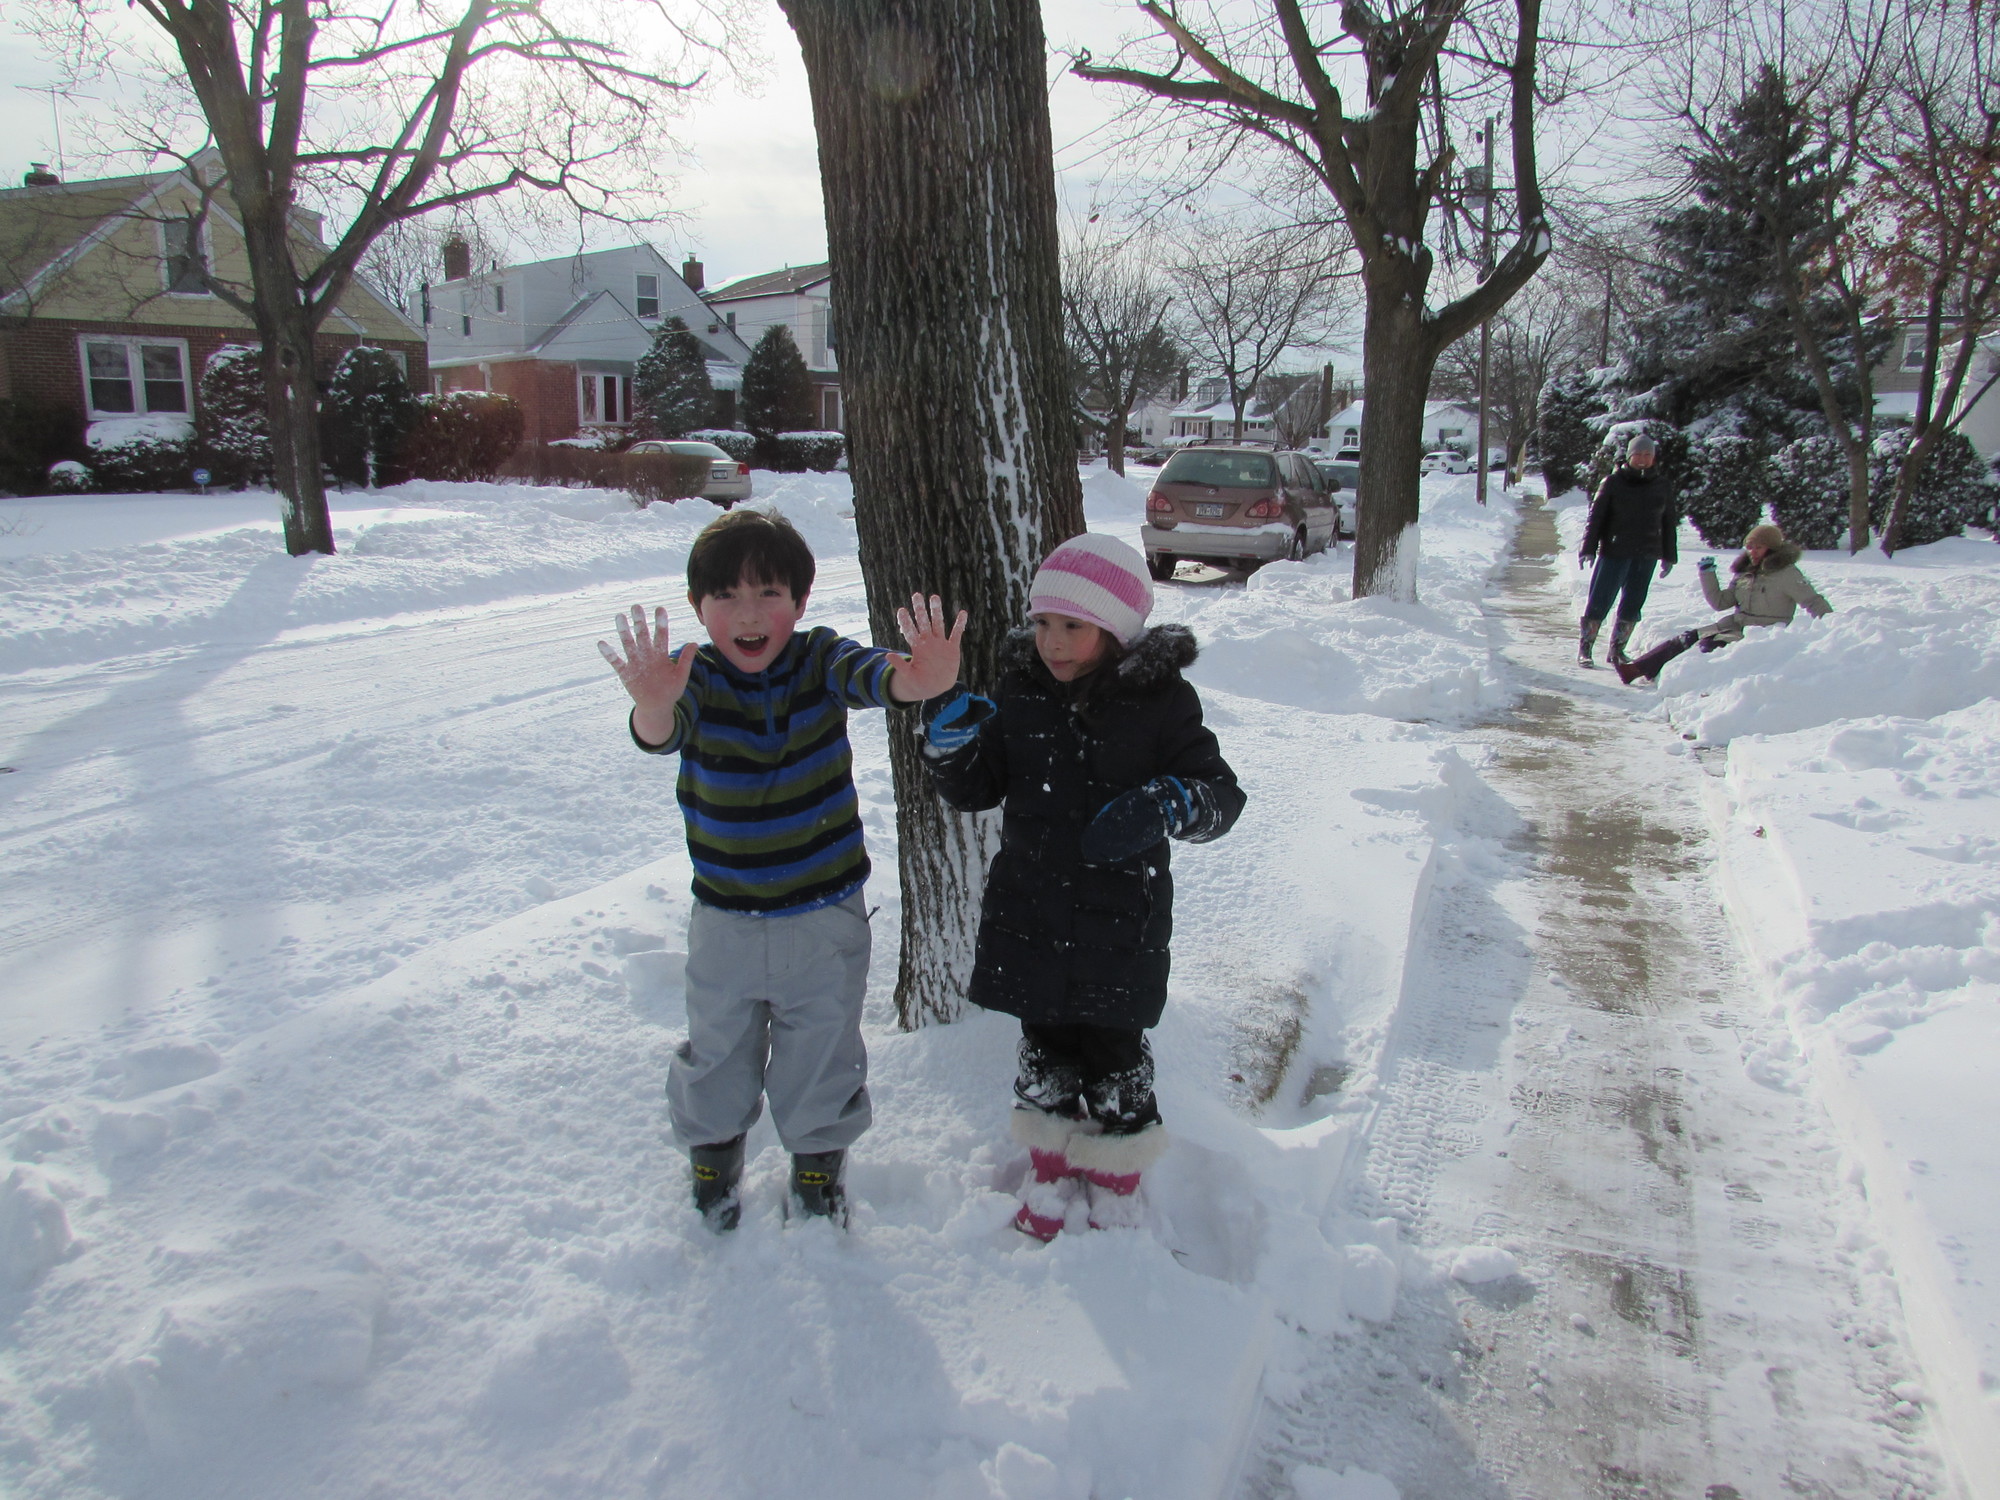 Matthew Sequeria, 5, played in the fresh snow with his cousin, Jamie, 5, who visited from Far Rockaway to celebrate the snow day.